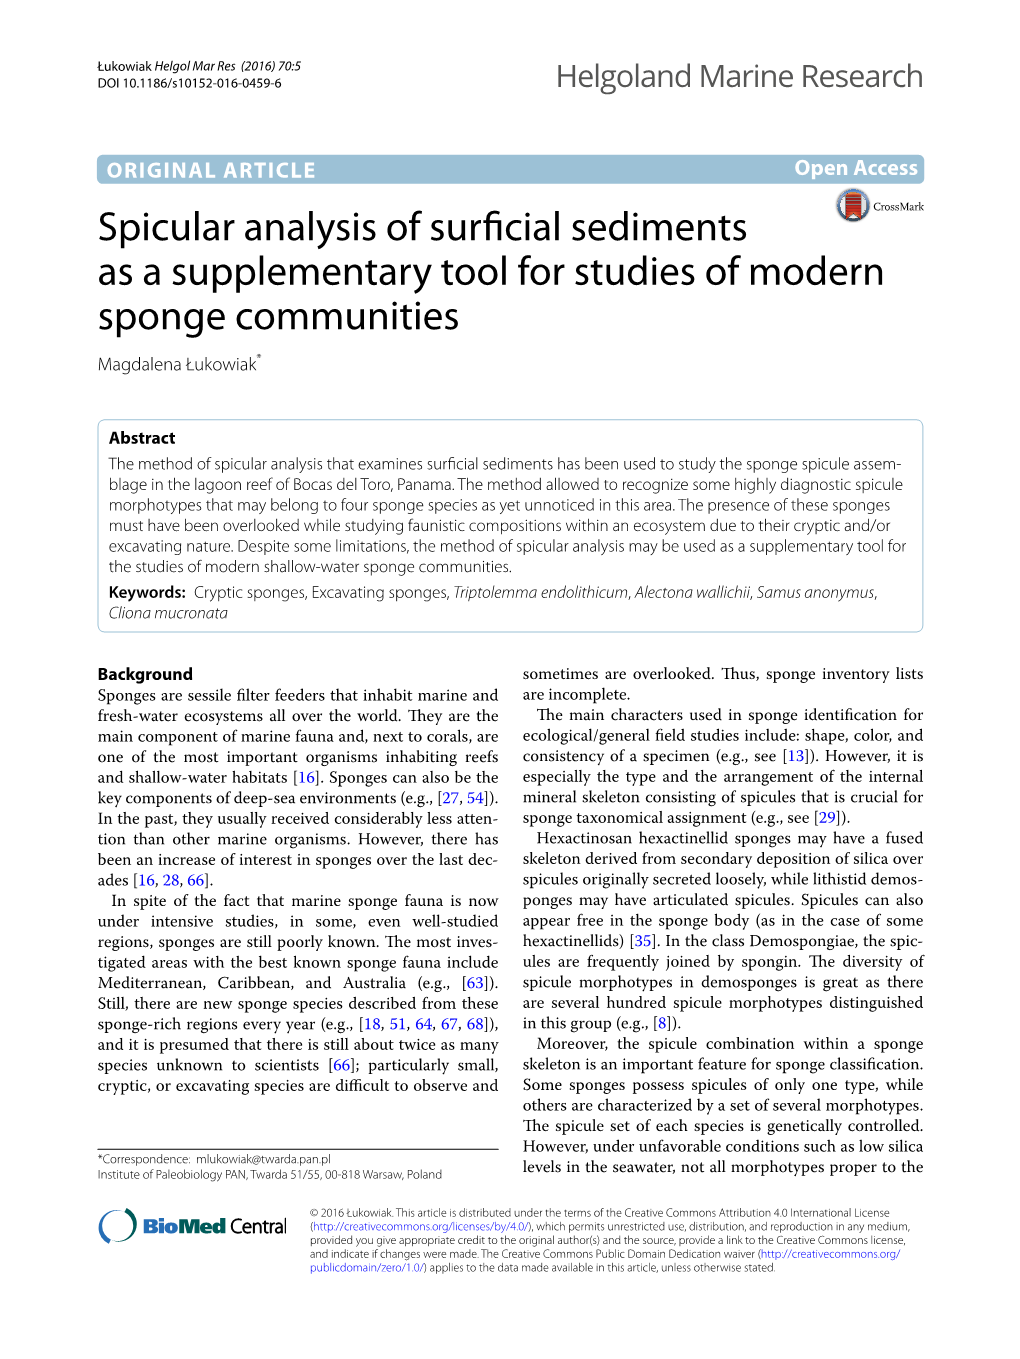 Spicular Analysis of Surficial Sediments As a Supplementary Tool for Studies of Modern Sponge Communities Magdalena Łukowiak*